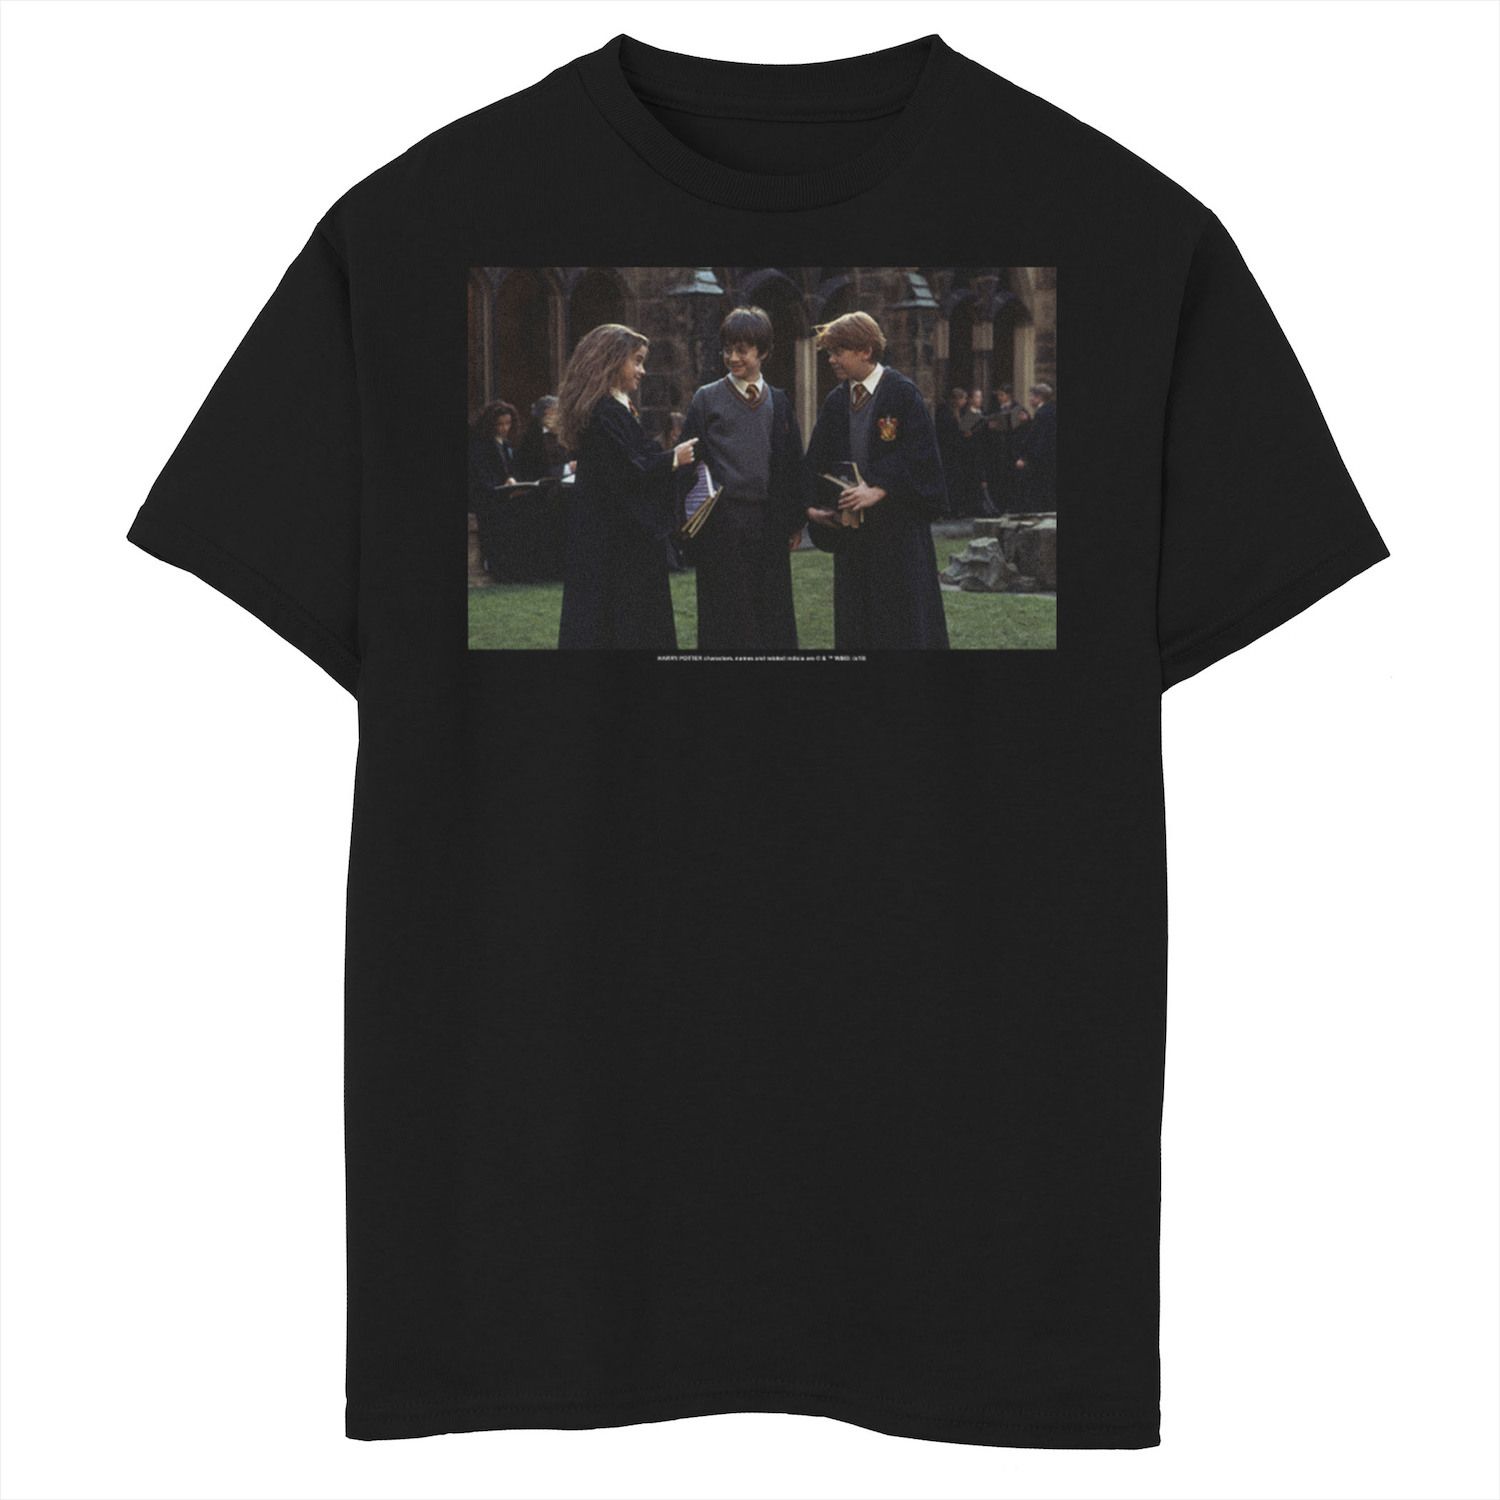 Image for Harry Potter Boys 8-20 Group Shot Portrait Graphic Tee at Kohl's.